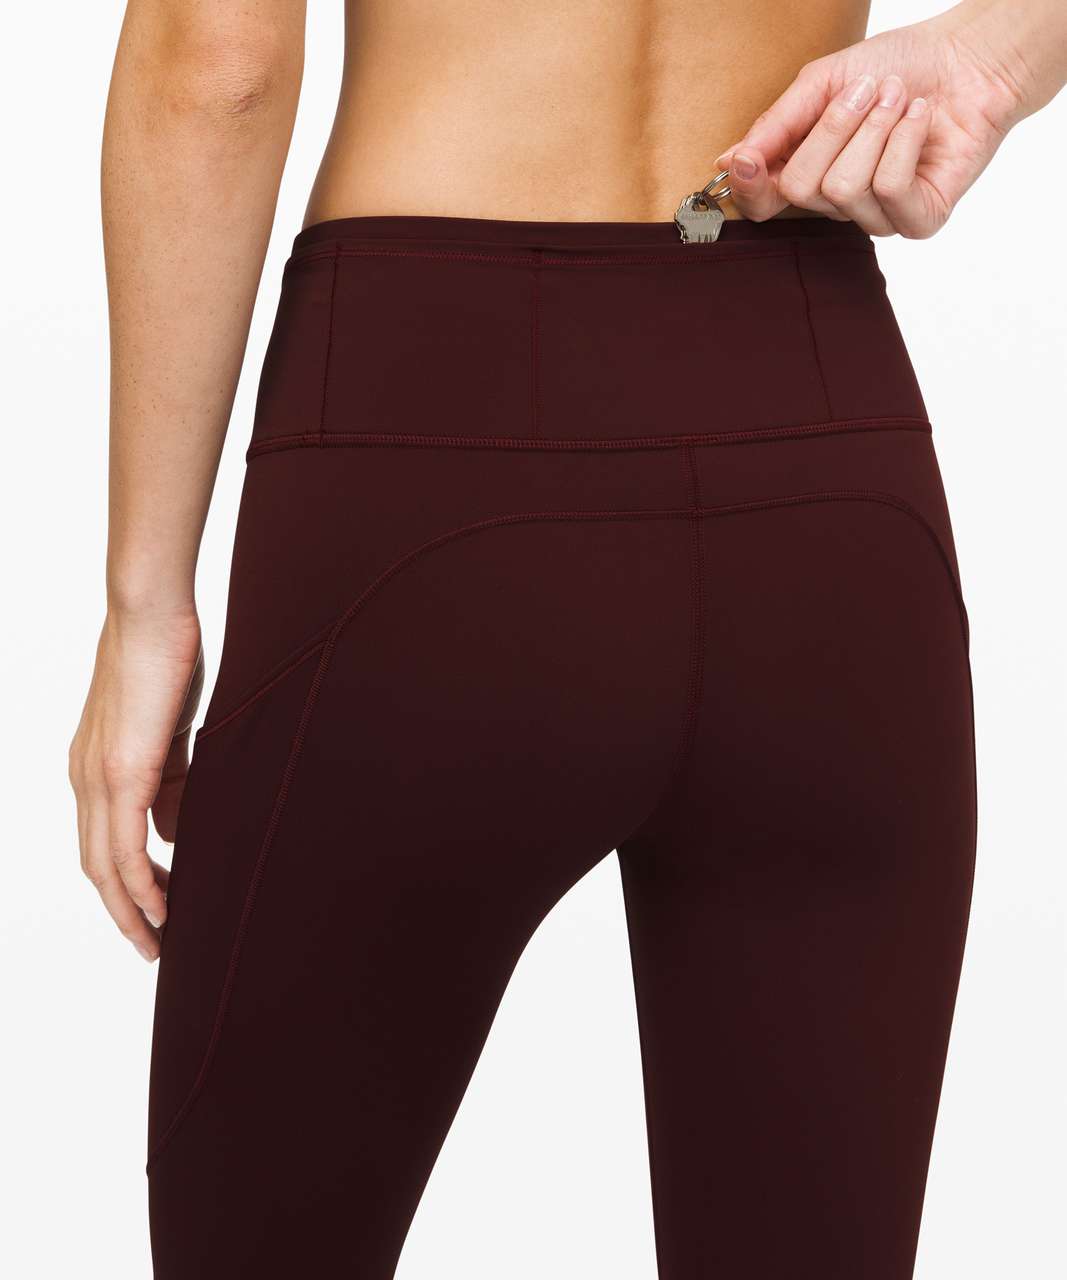 Lululemon Fast and Free High-Rise Tight 28" *Non-Reflective Brushed Nulux - Garnet